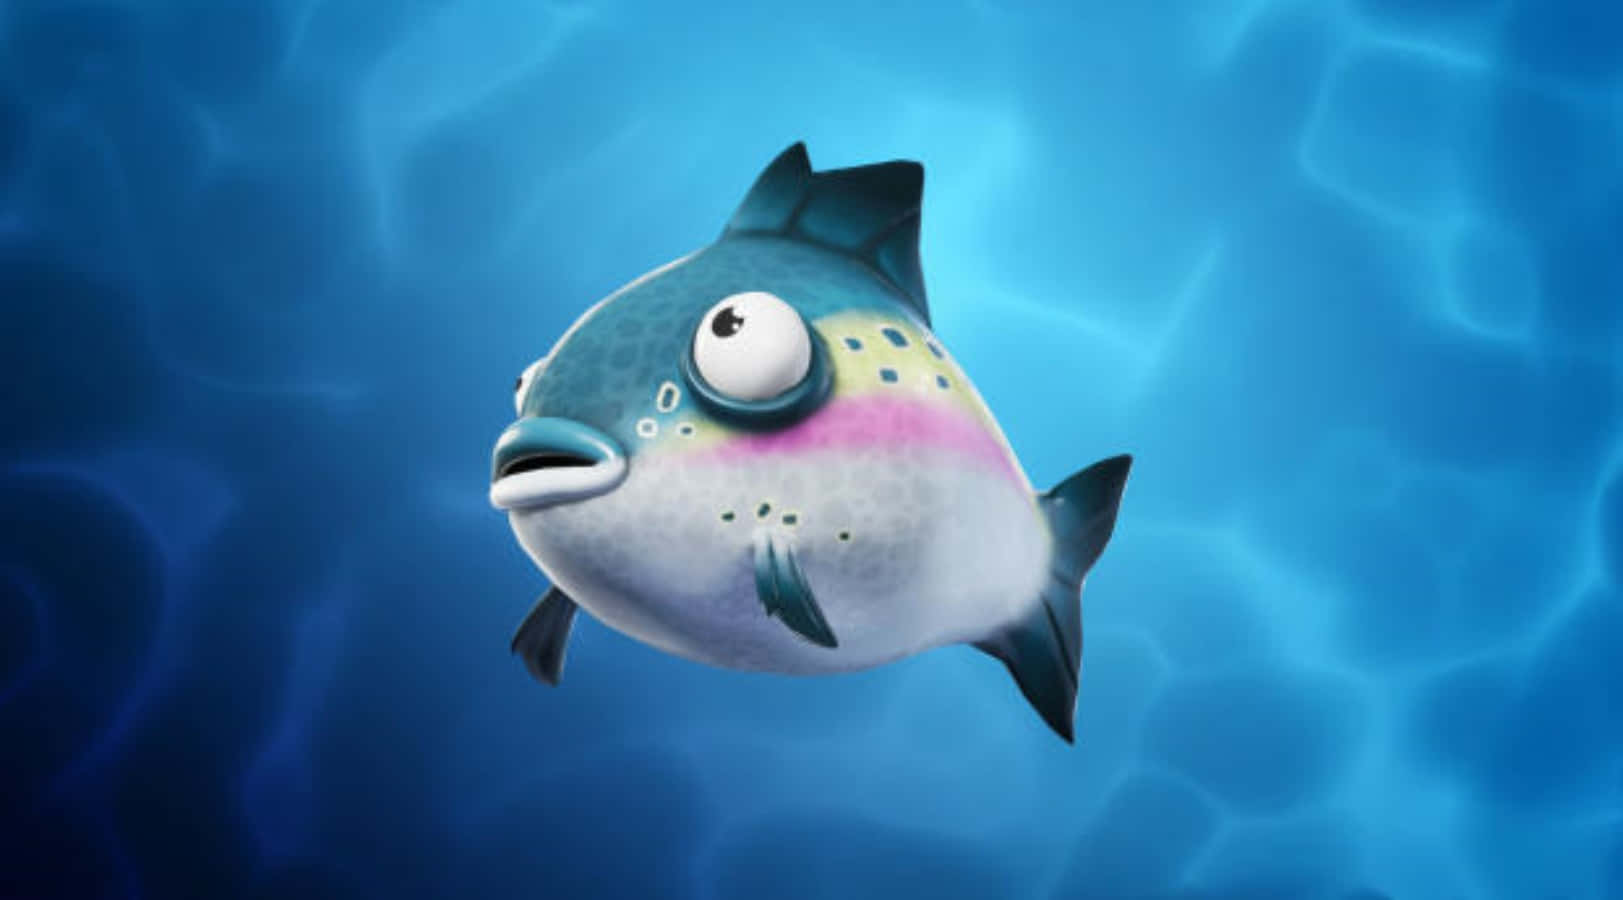 Funny Blue Flopper Fish Picture